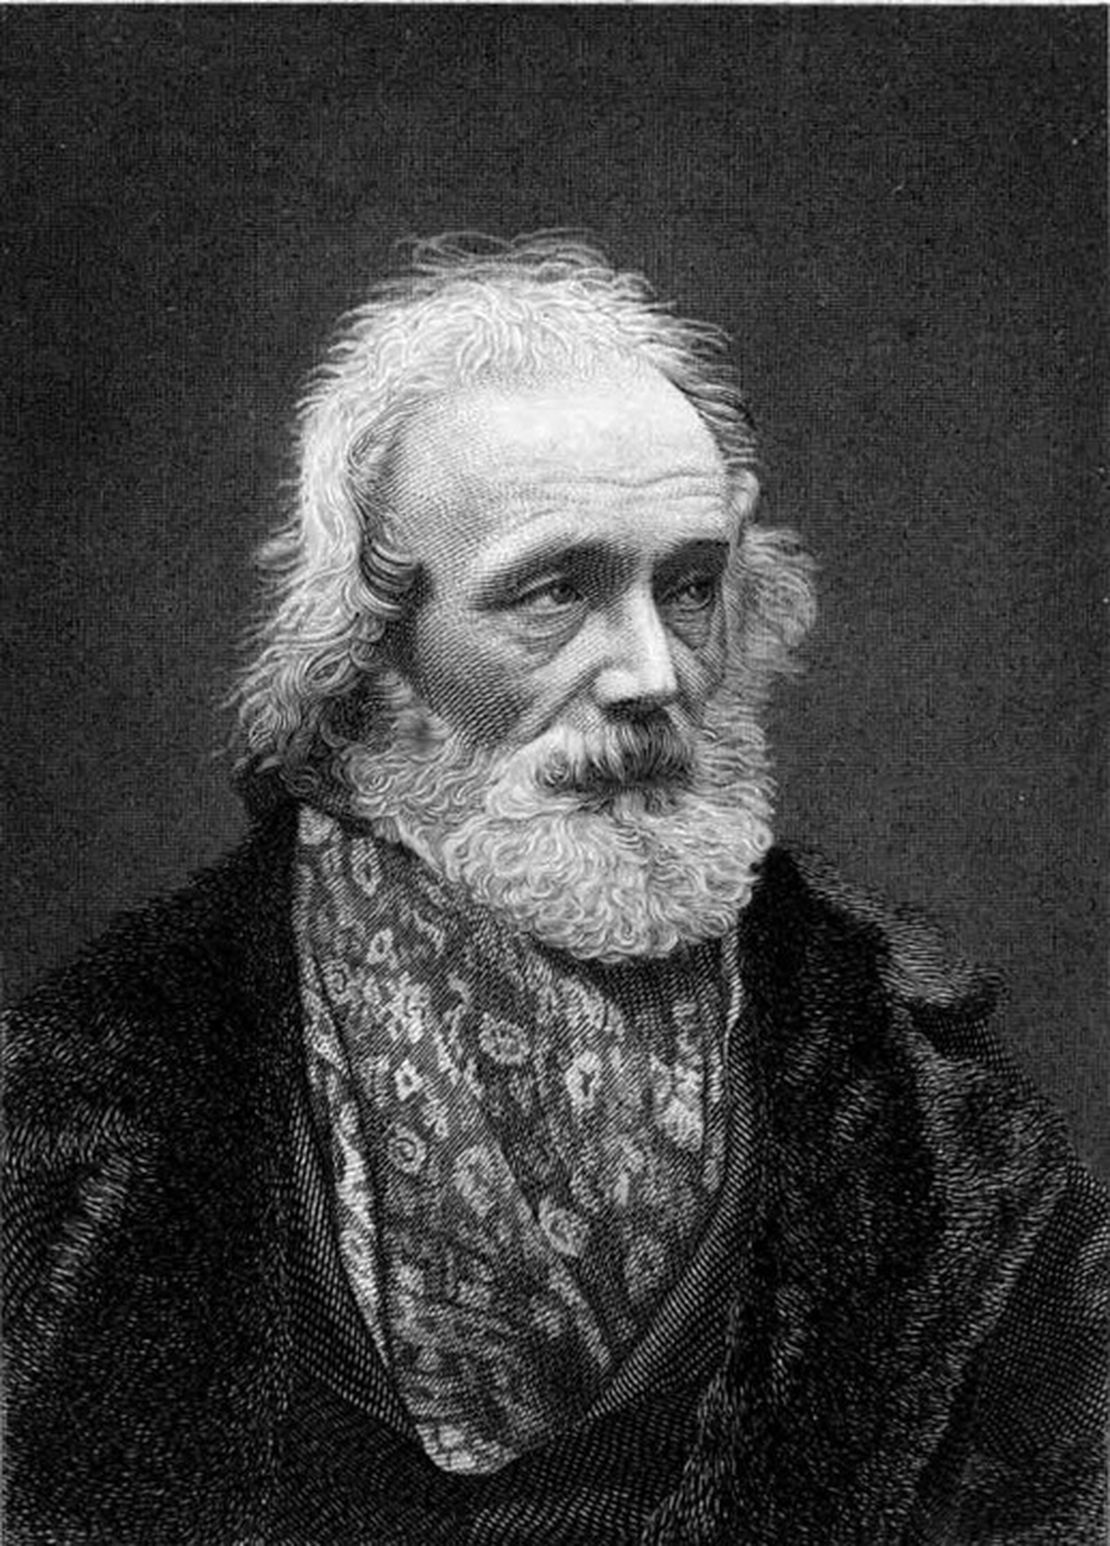 James Henry, physician and classical scholar, is born in Dublin